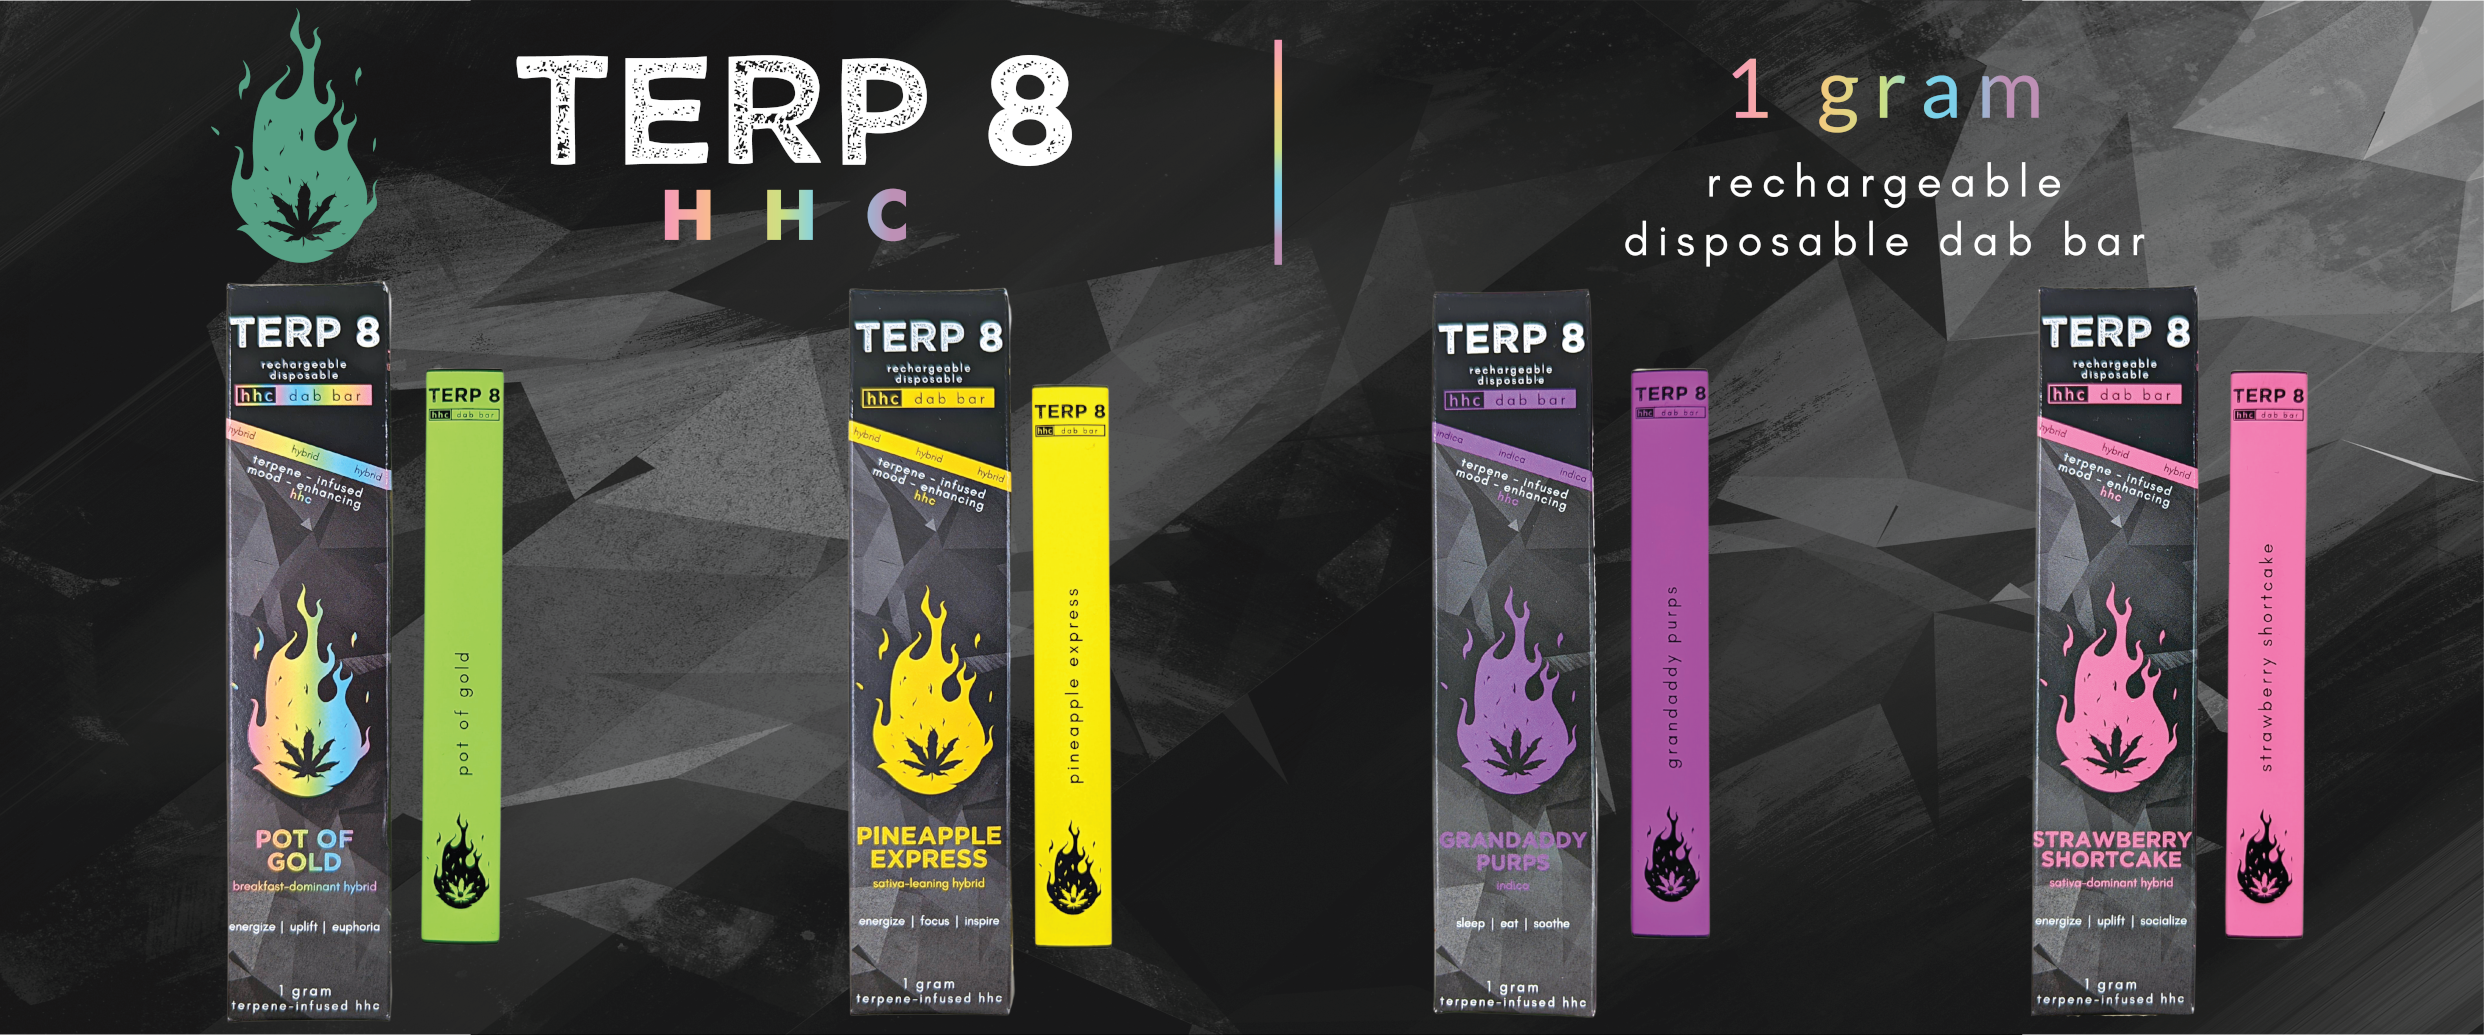 Terp 8 HHC Rechargeable Disposable Dab Bars 1 Gram